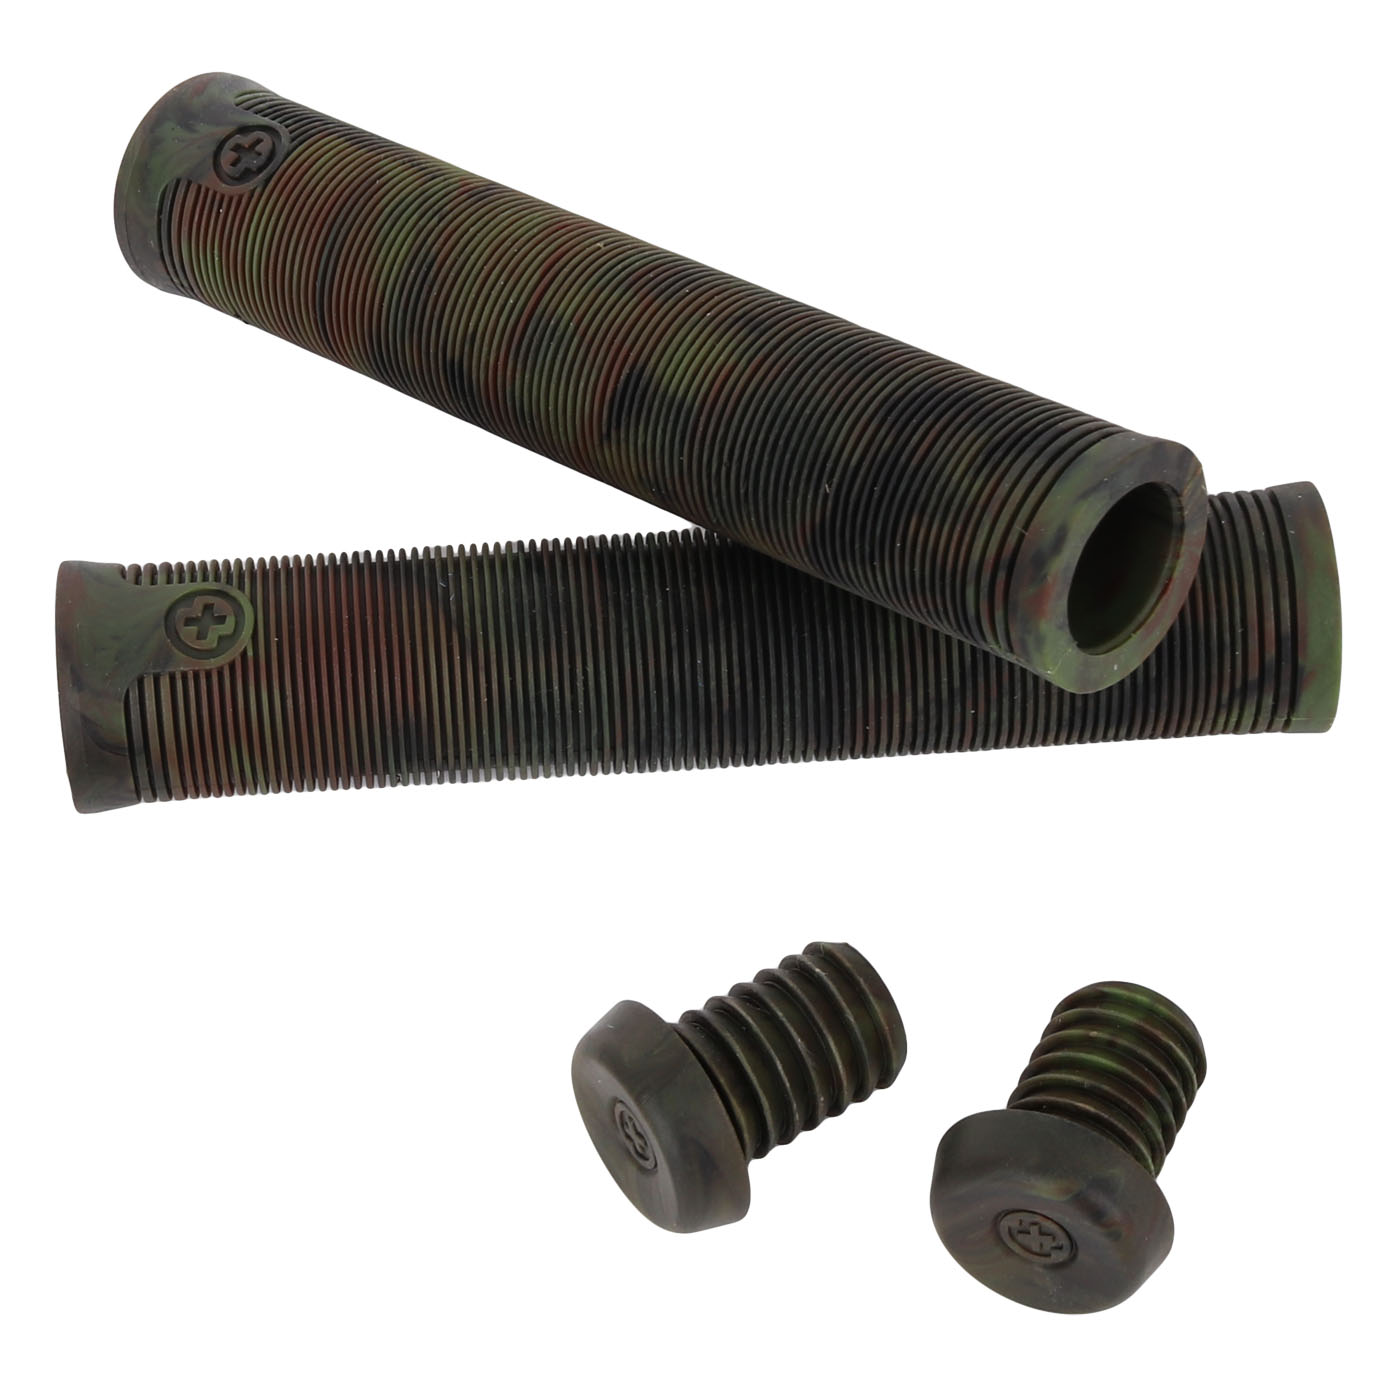 Picture of Salt Plus XL Flangeless Grips - camouflage